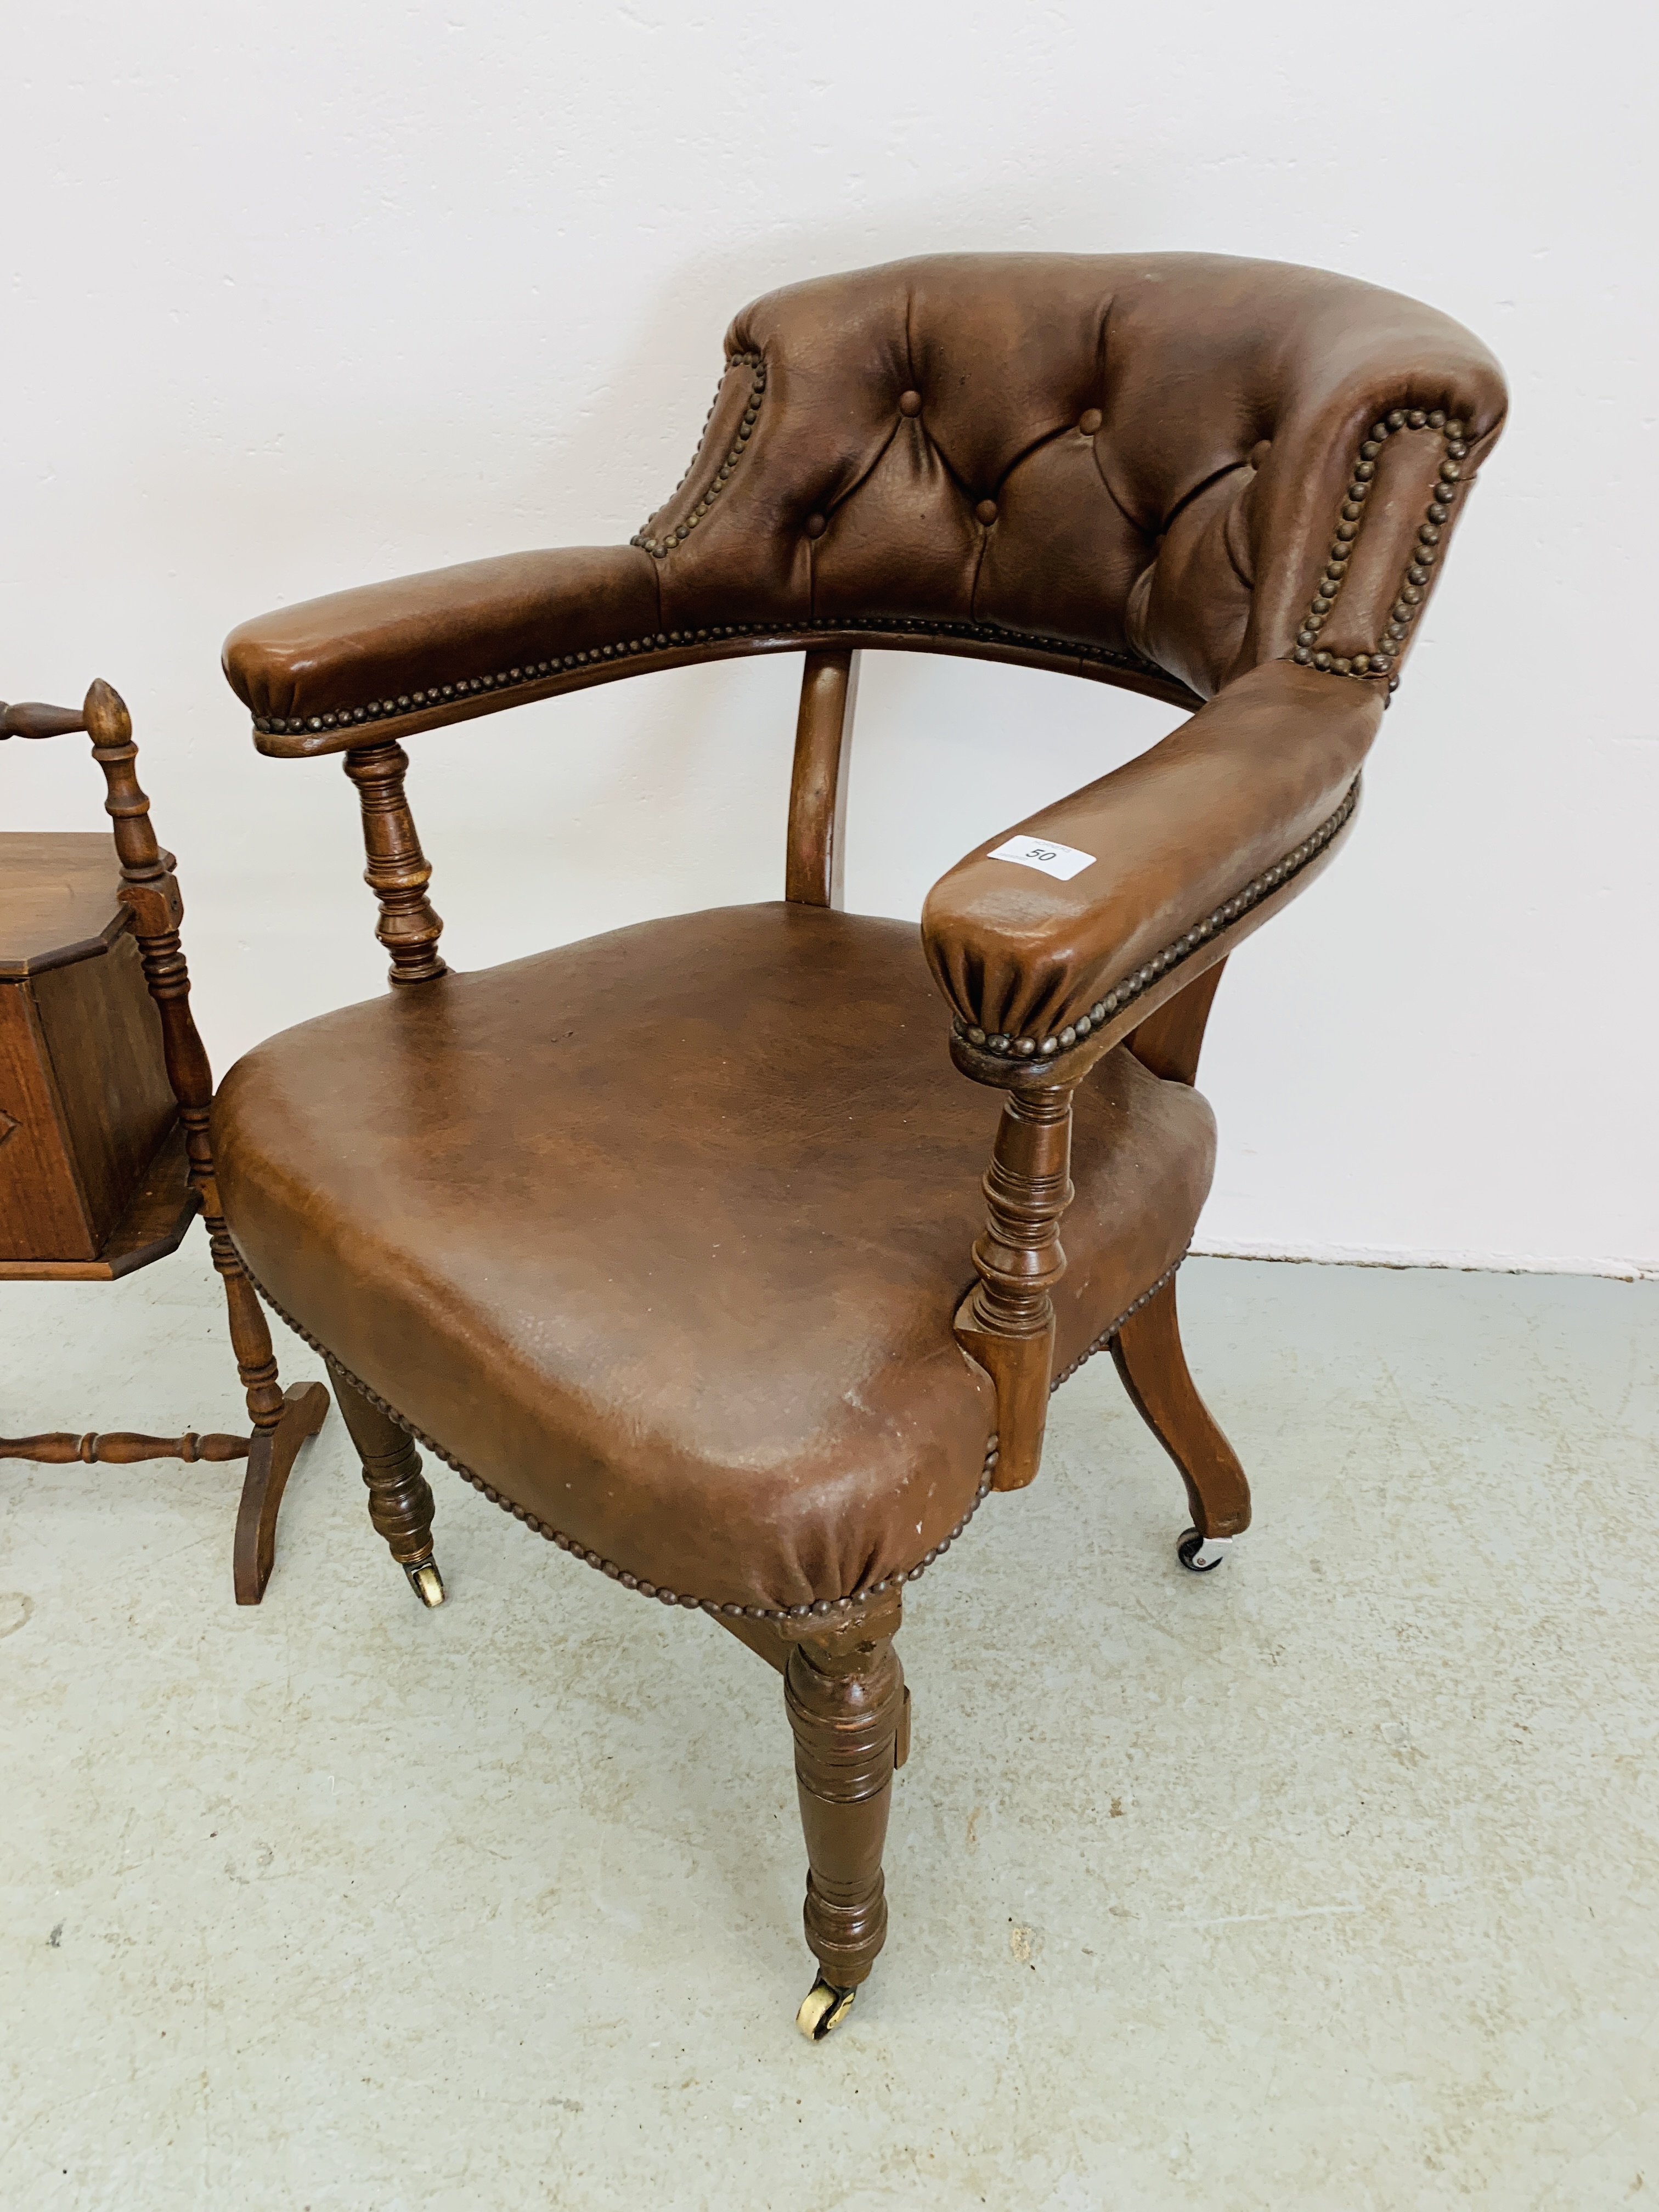 A REPRODUCTION BROWN LEATHER OFFICE CHAIR WITH STUDD DETAIL ALONG WITH A SMALL SINGLE DOOR TURNED - Image 2 of 8